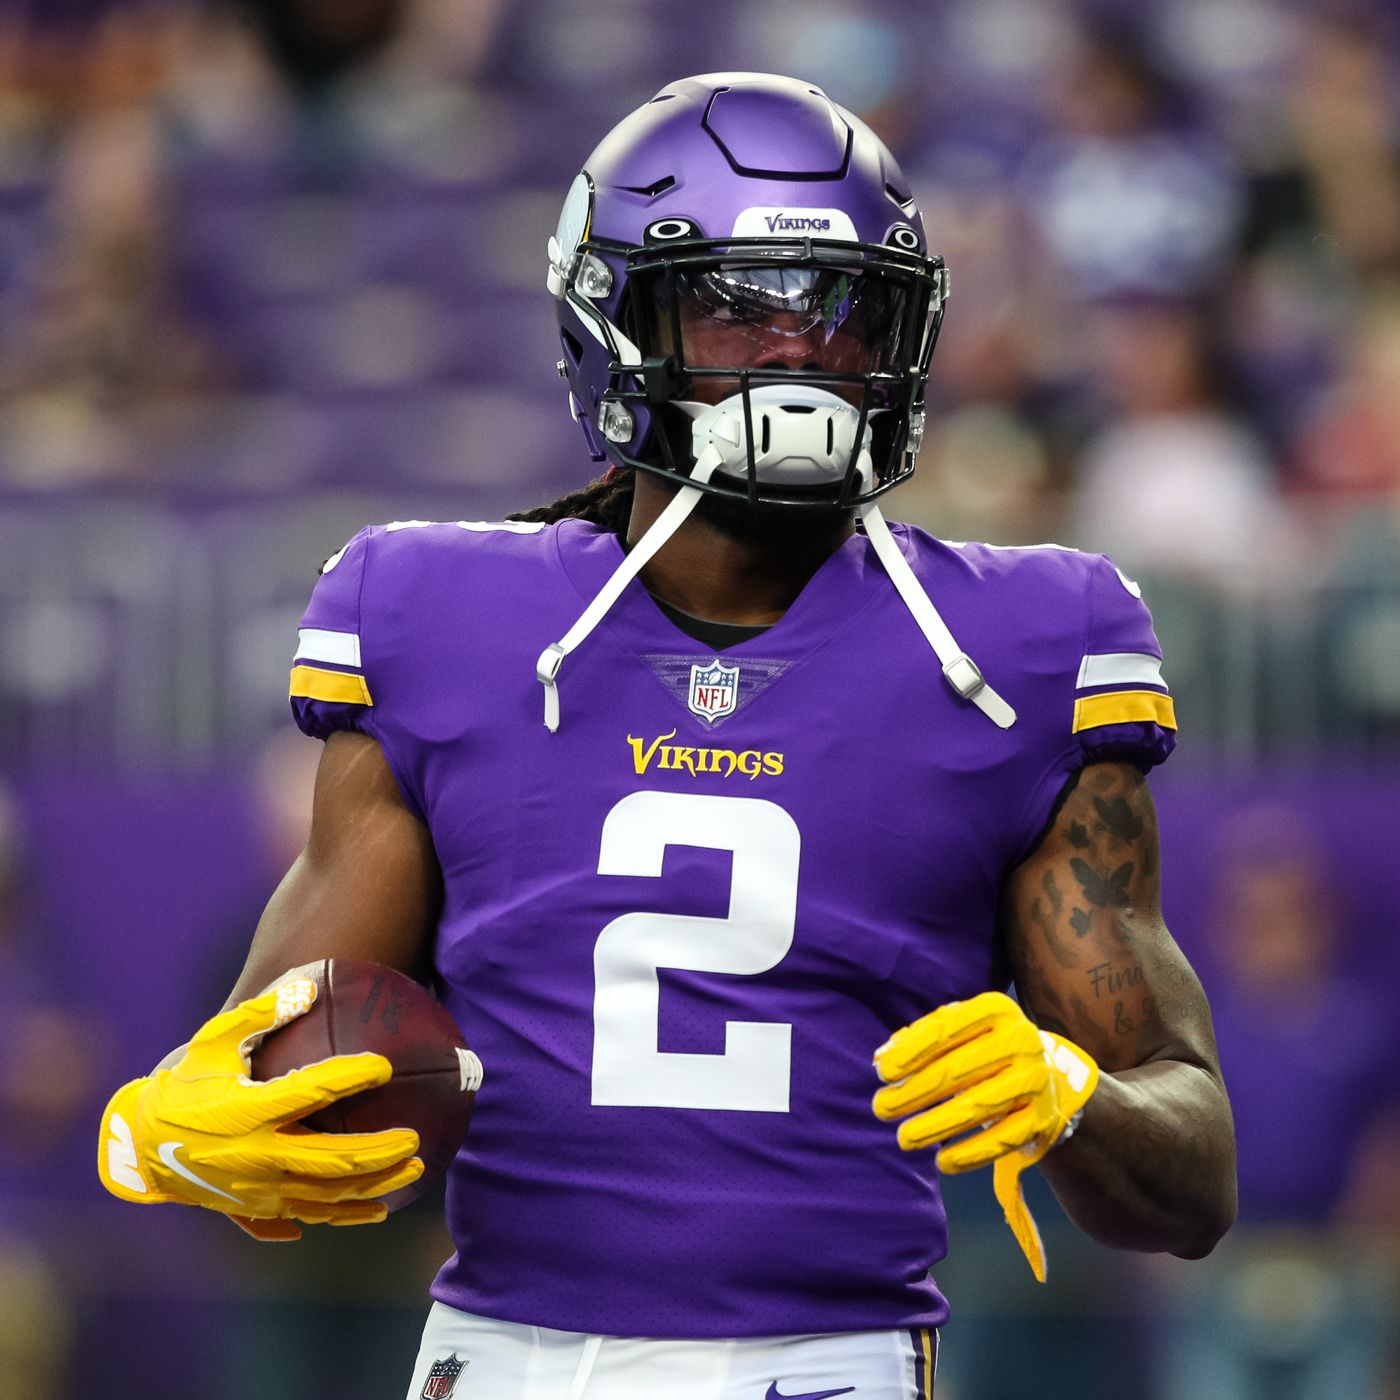 Vikings Pay Up for Alexander Mattison, is He Ready for a Big-Time